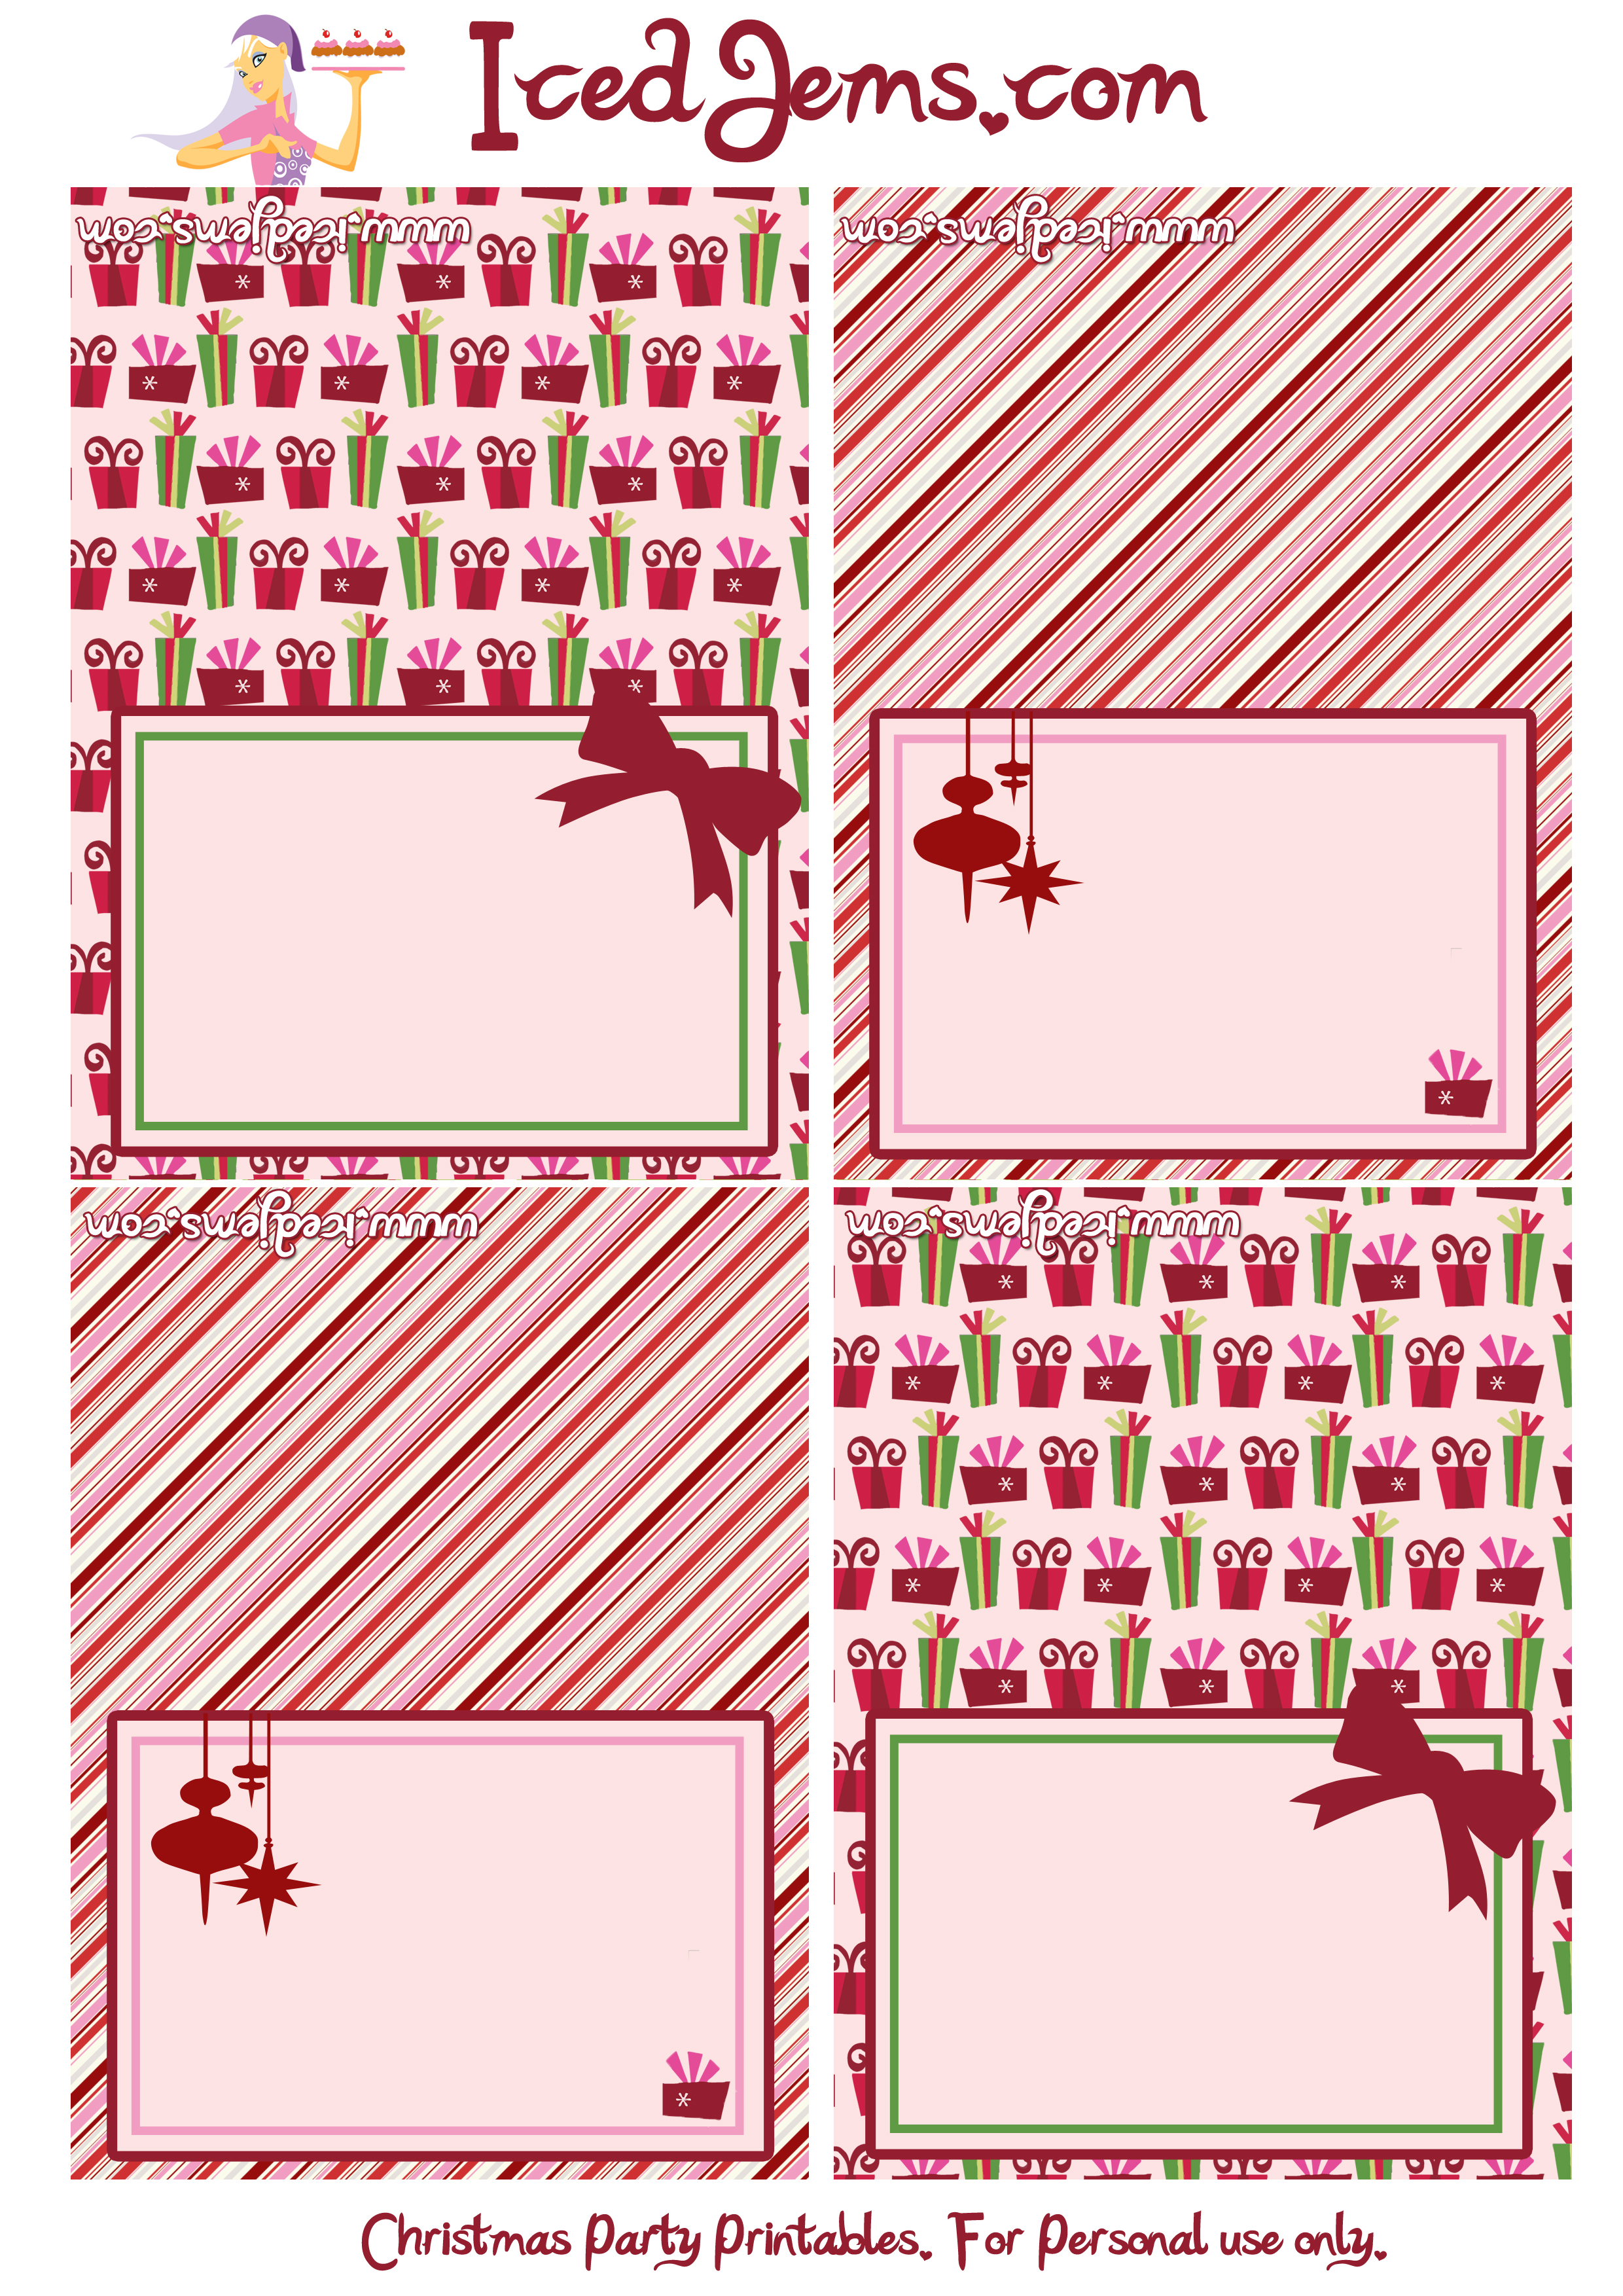 free-christmas-party-printables-iced-jems